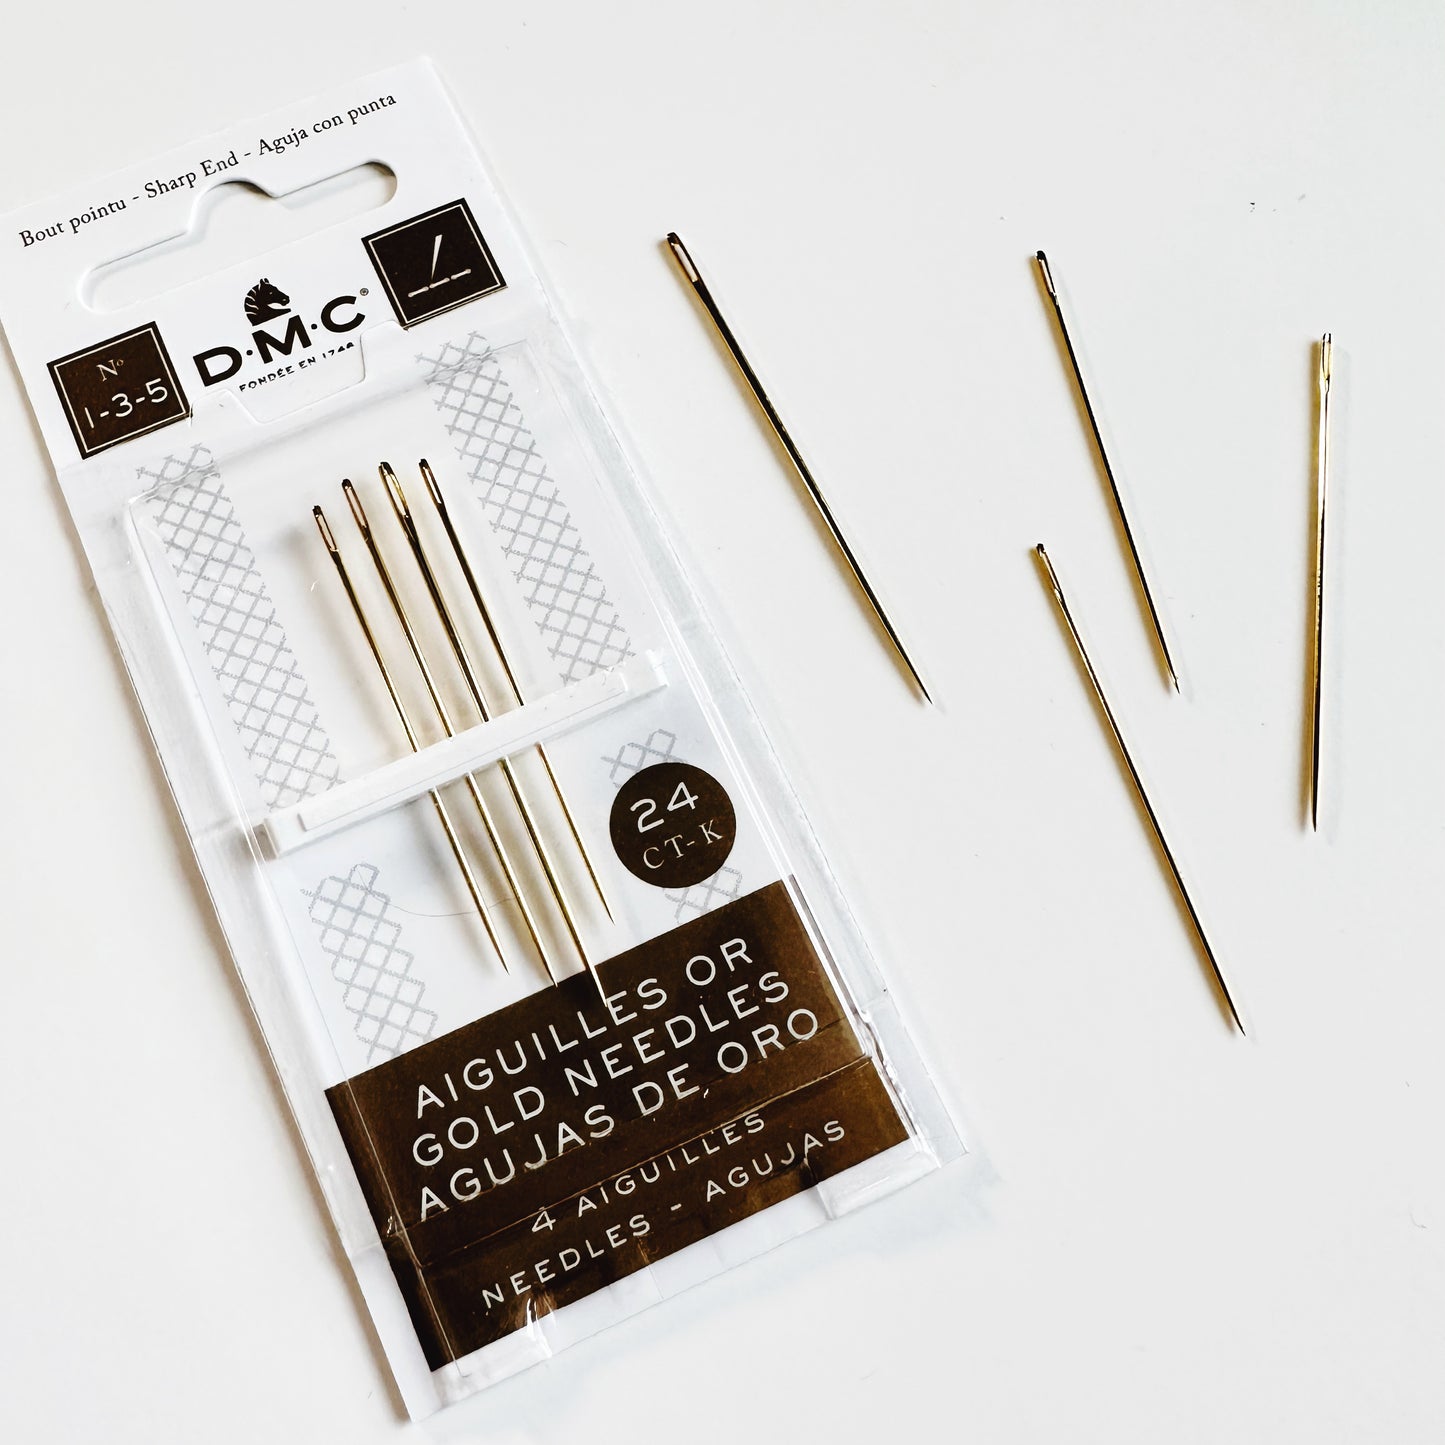 DMC 24K Gold Plated Embroidery Needles 4-pack, sizes 1-3-5